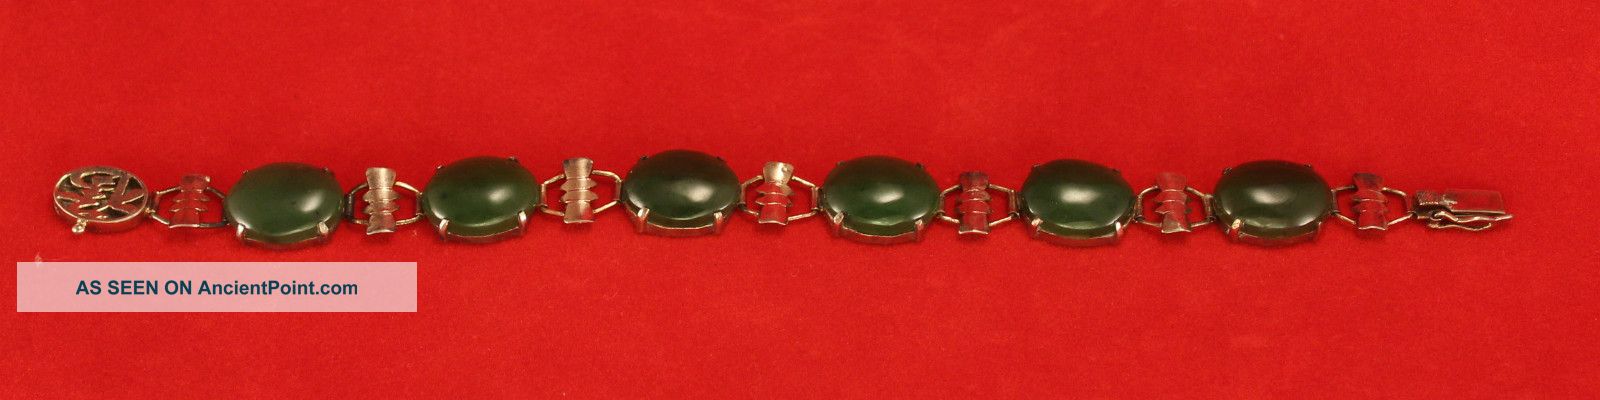 Vintage Chinese Jade Silver Deco Bracelet With An Awesome Clasp Bracelets photo